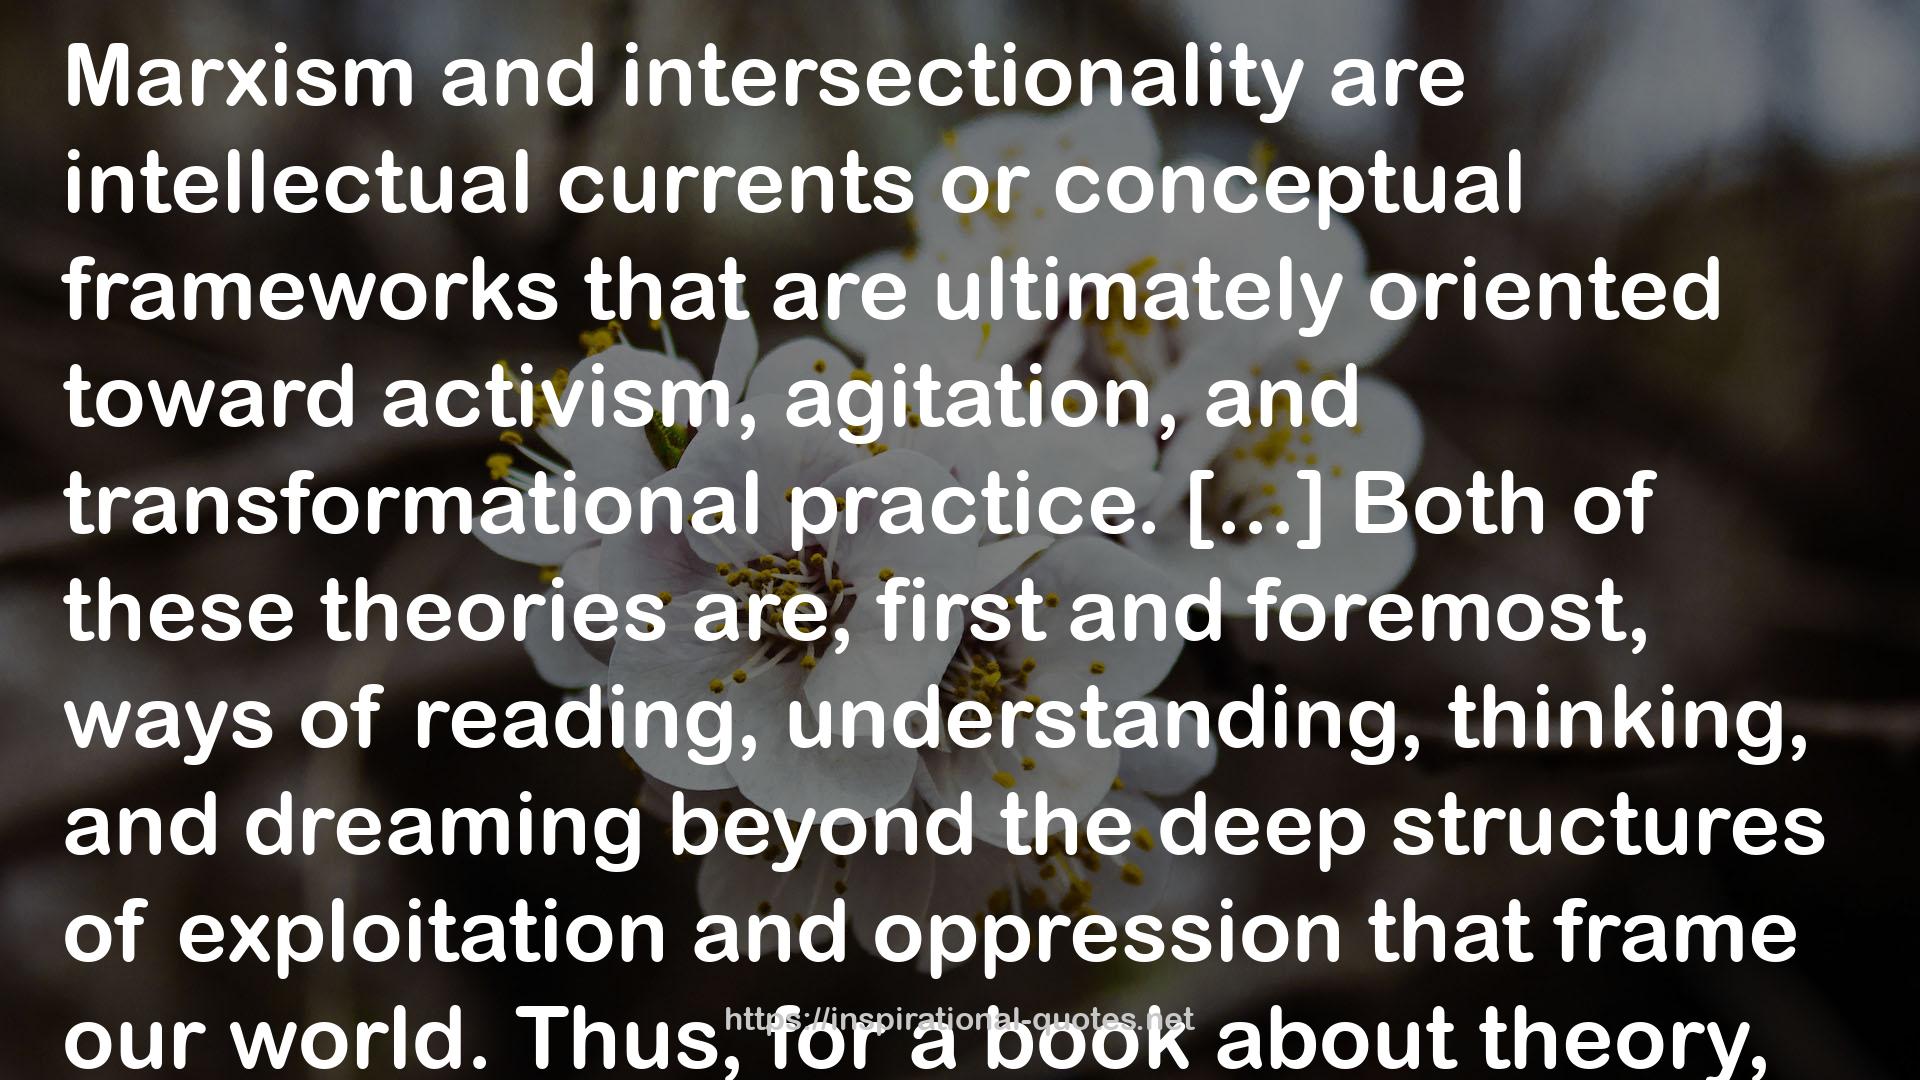 Marxism and Intersectionality: Race, Gender, Class and Sexuality under Contemporary Capitalism QUOTES